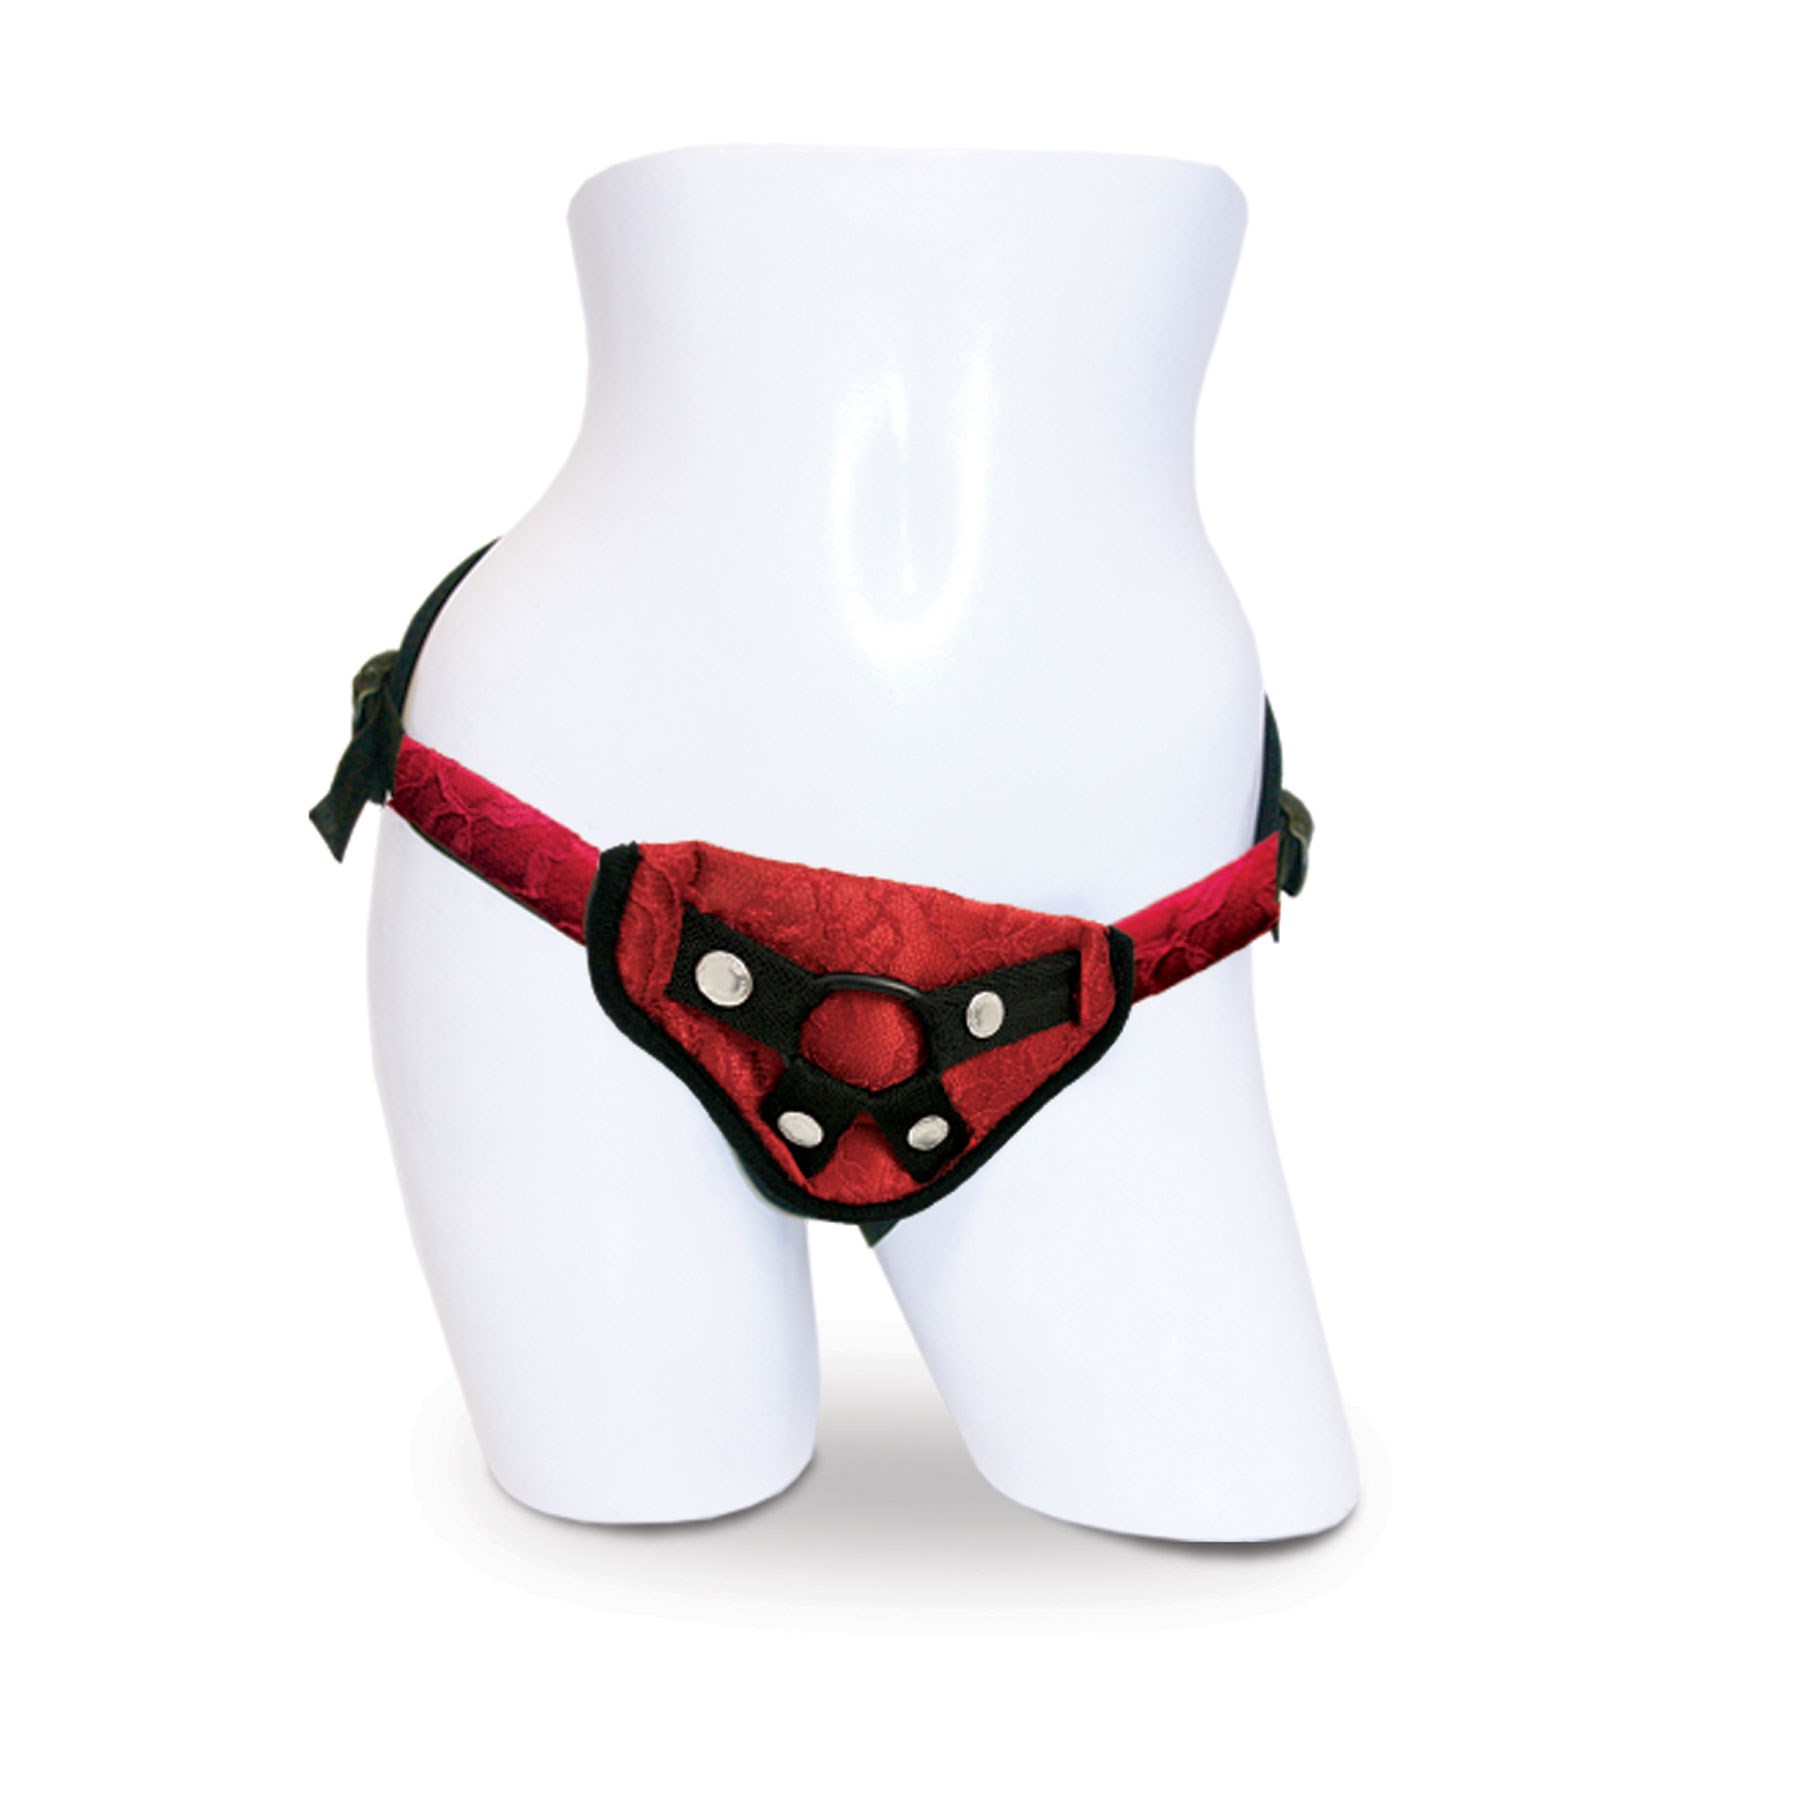 Sportsheets Red Lace Corsette Strap-On Harness front